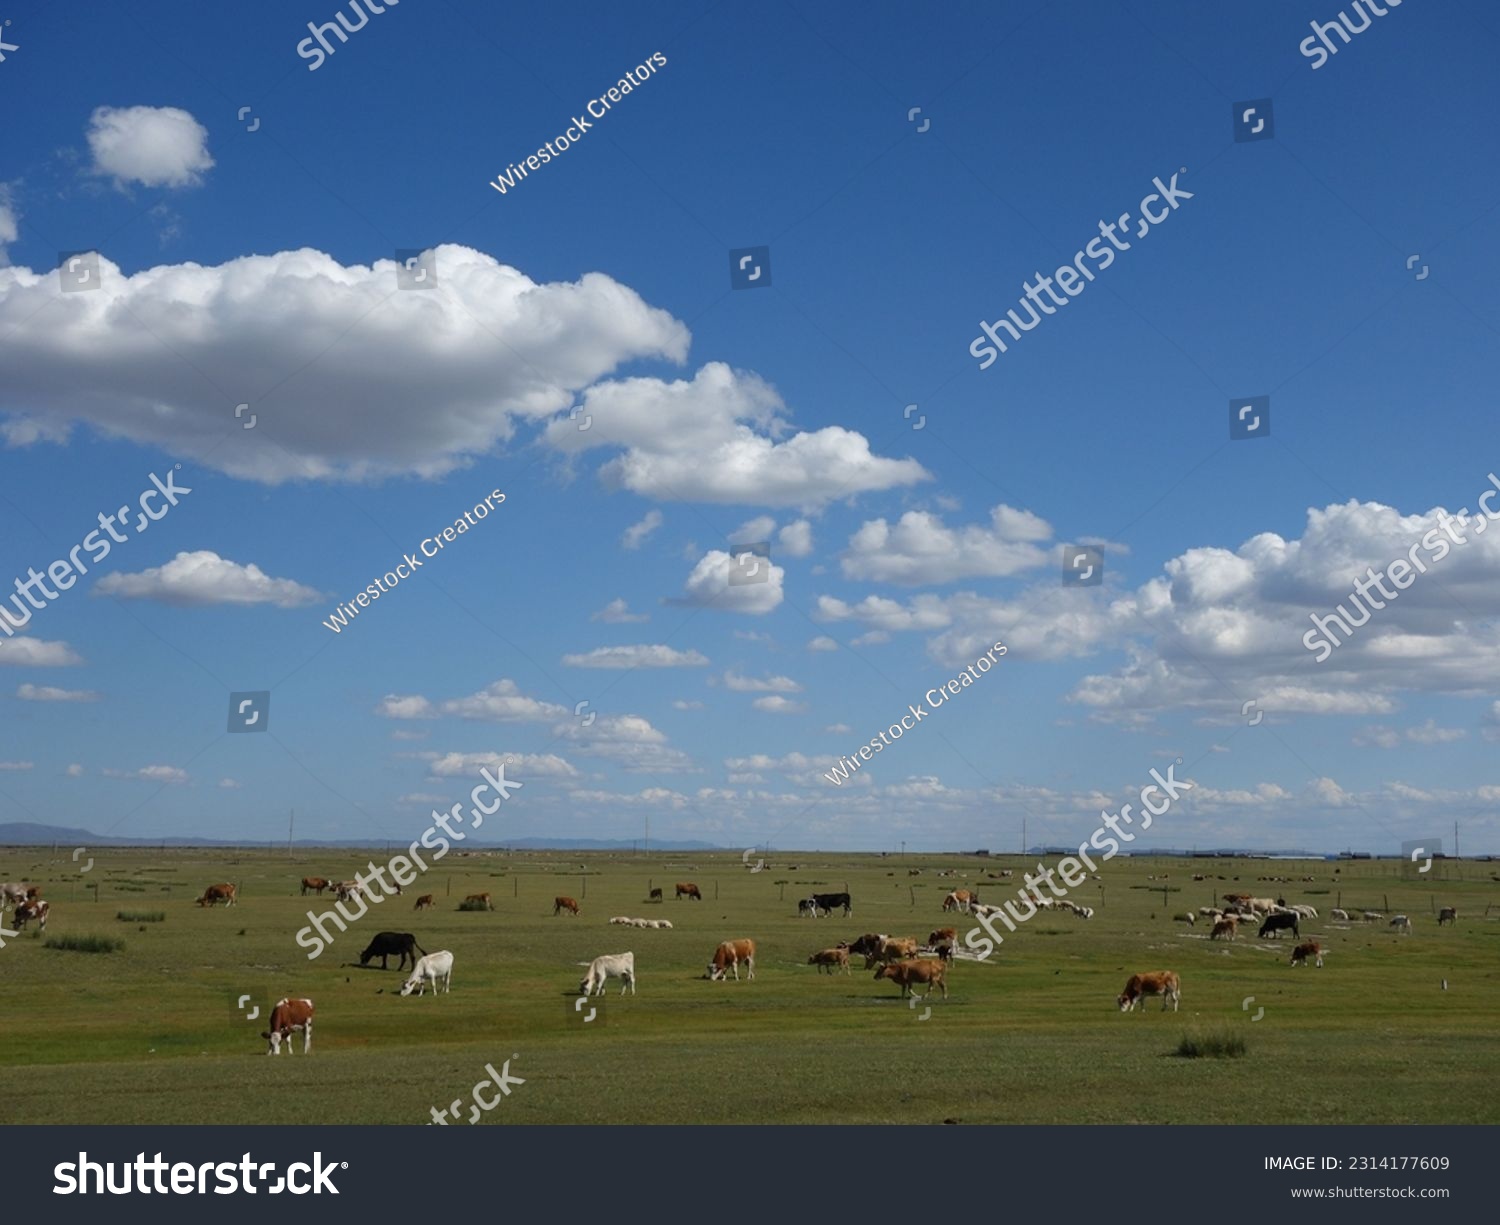 A distant shot of cattle grazing in a green steppe under the clouds and blue sky #2314177609